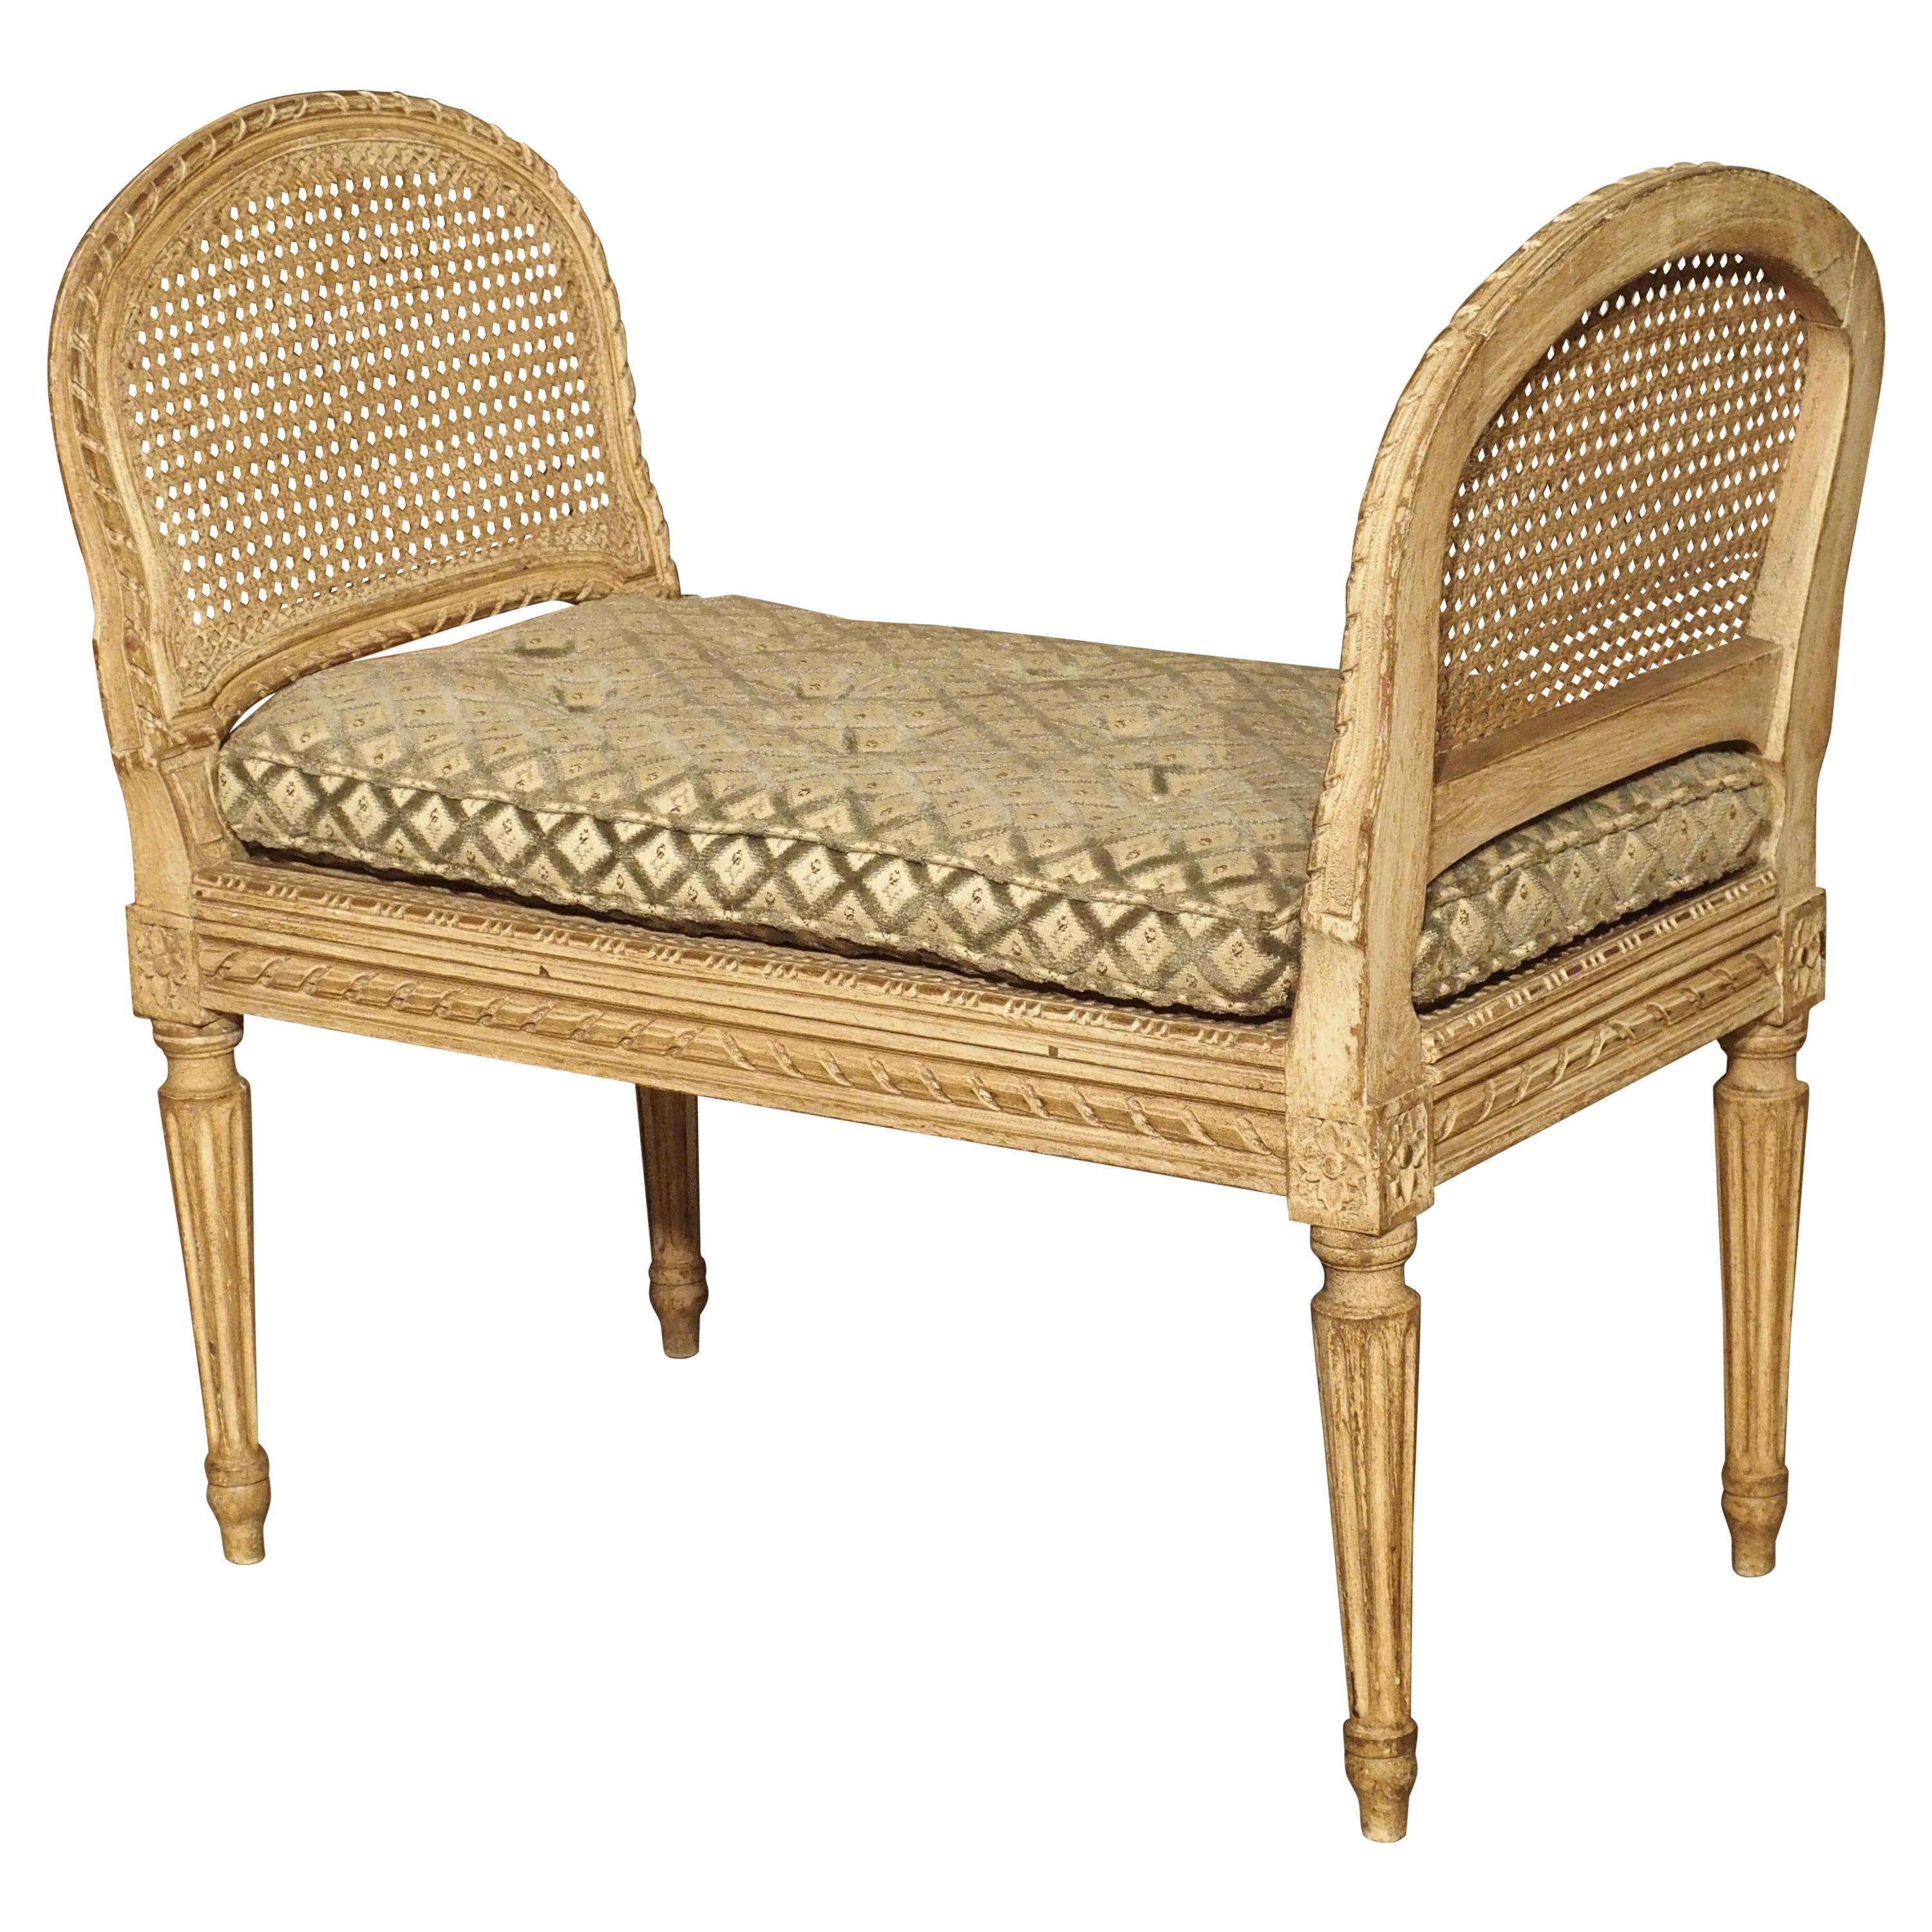 Small Caned and Painted Louis XVI Style Banquette, Circa 1890